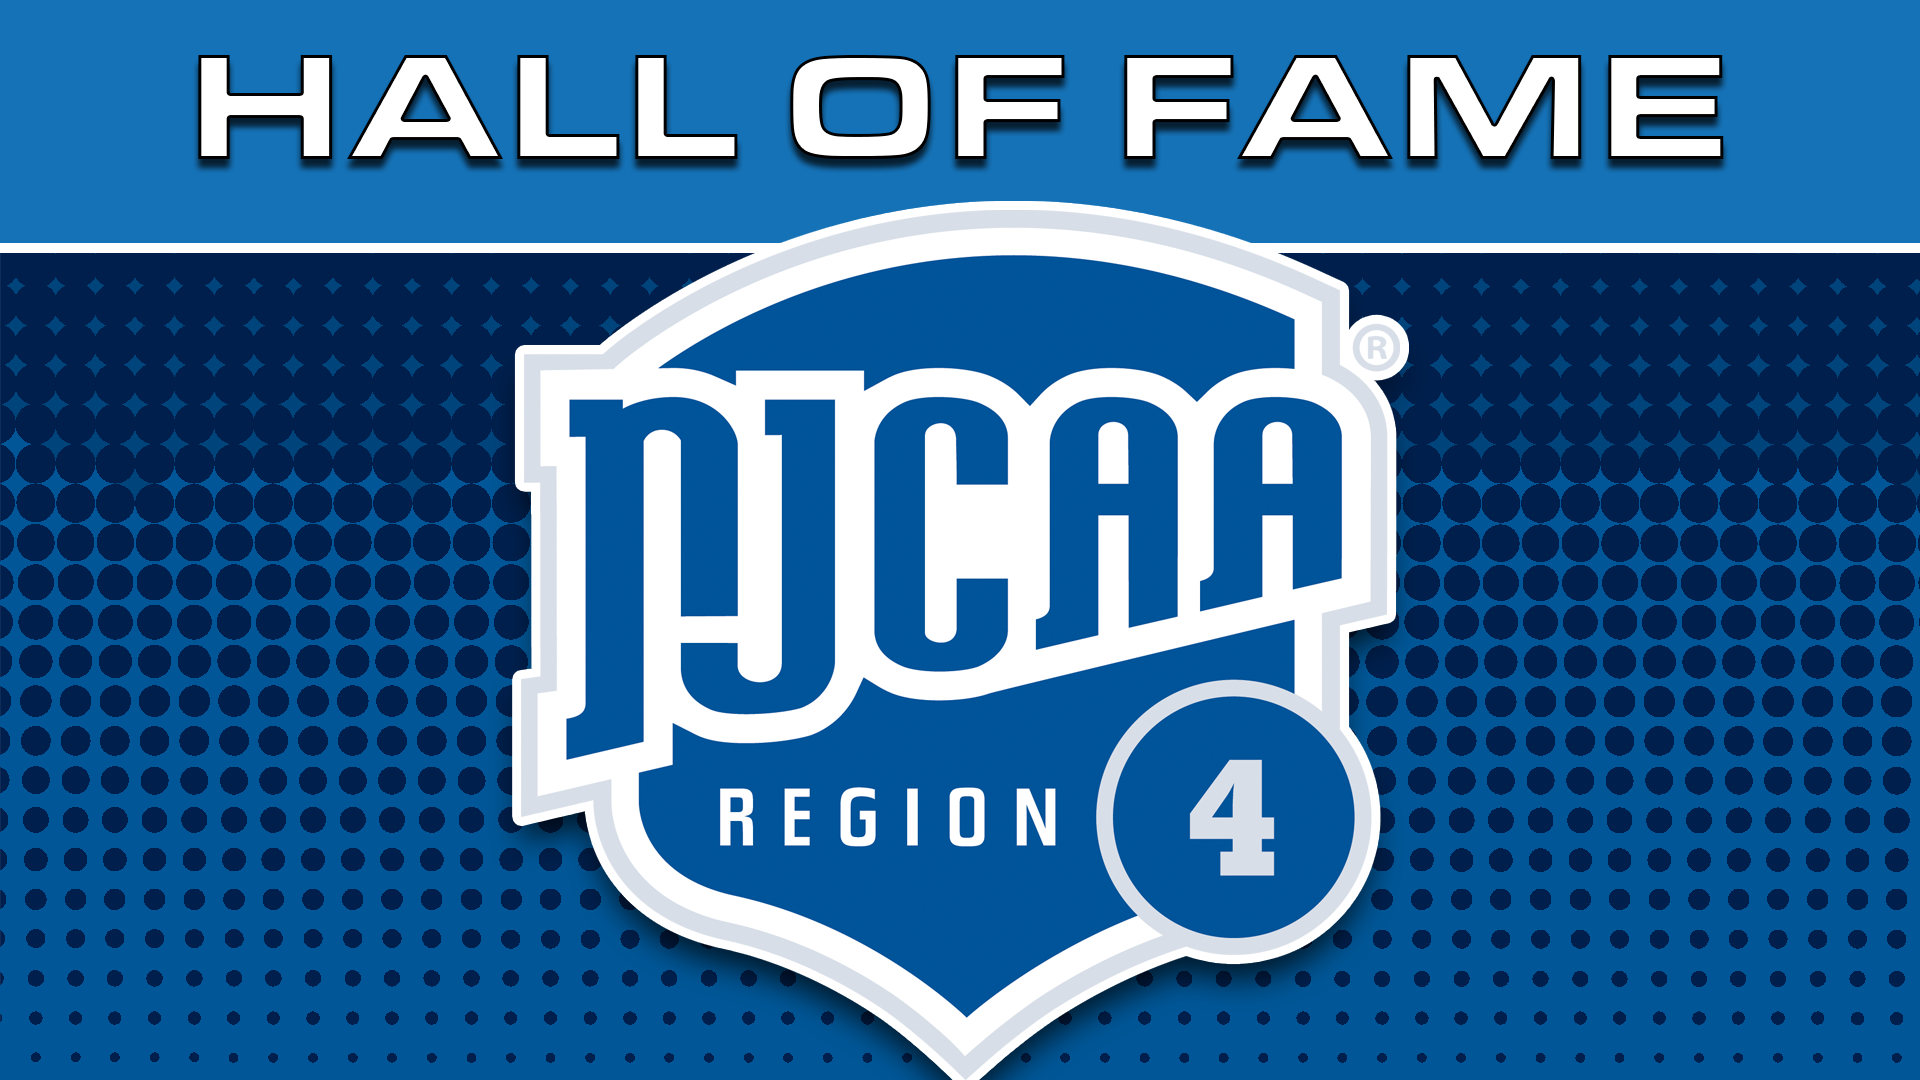 Region 4 Hall of Fame to welcome 12-member induction Class of 2023